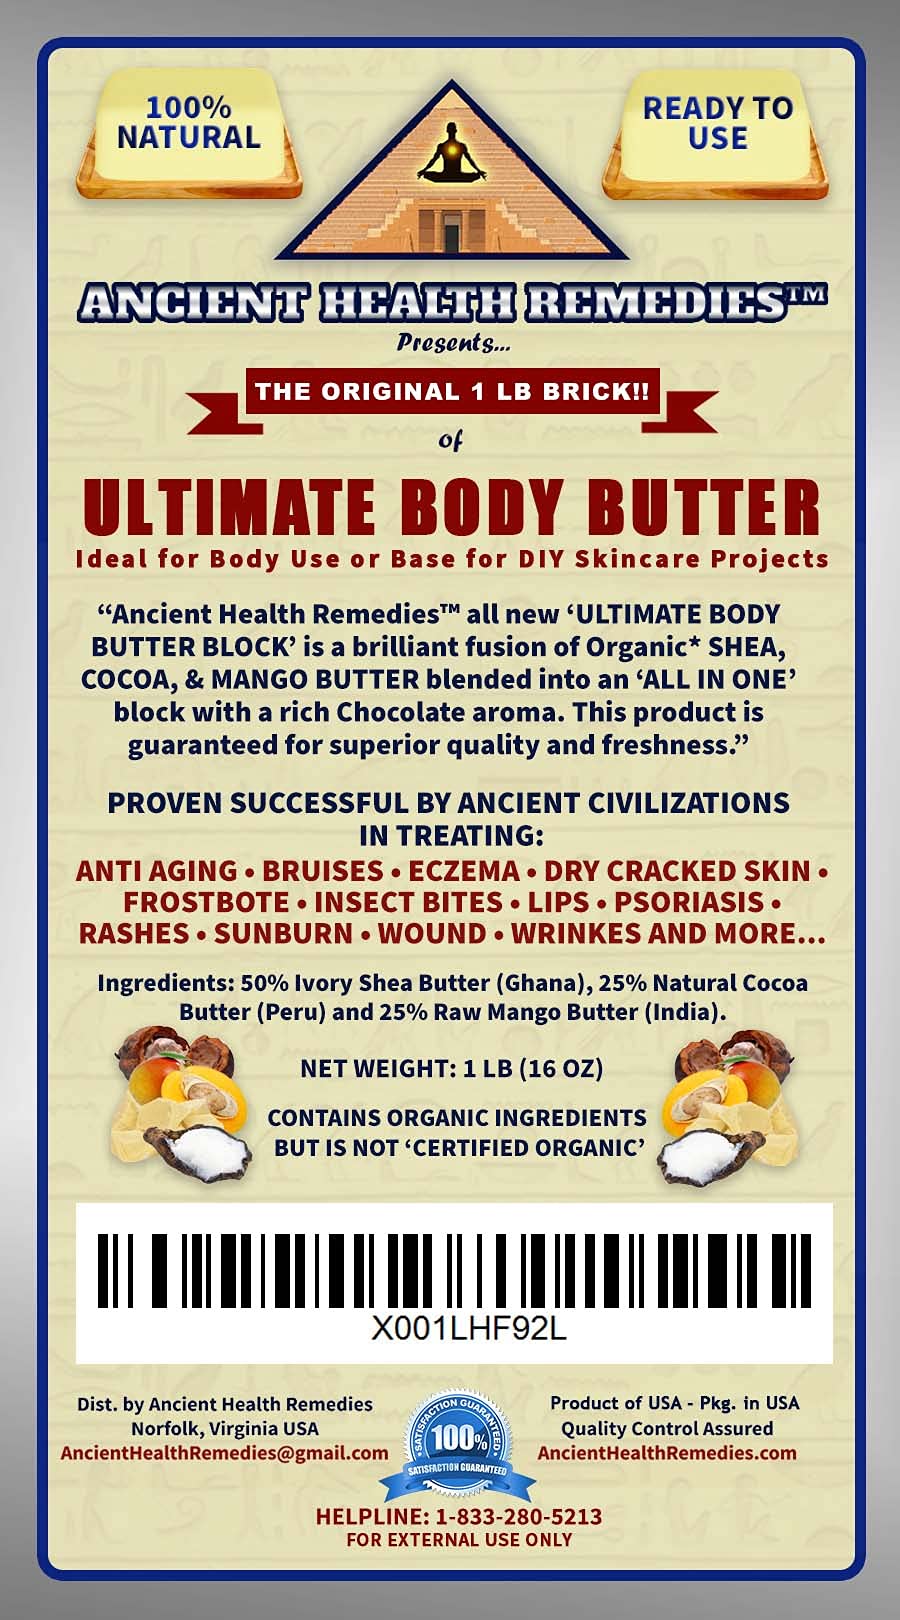 Ancient Health Remedies Organic Shea, Cocoa, Mango Butter ULTIMATE BODY BUTTER BLOCK 1 LB (16 oz) Raw, Unrefined Skincare Ingredient for Homemade DIY Lotion Making, Baby Care and Hand Cream (USA)